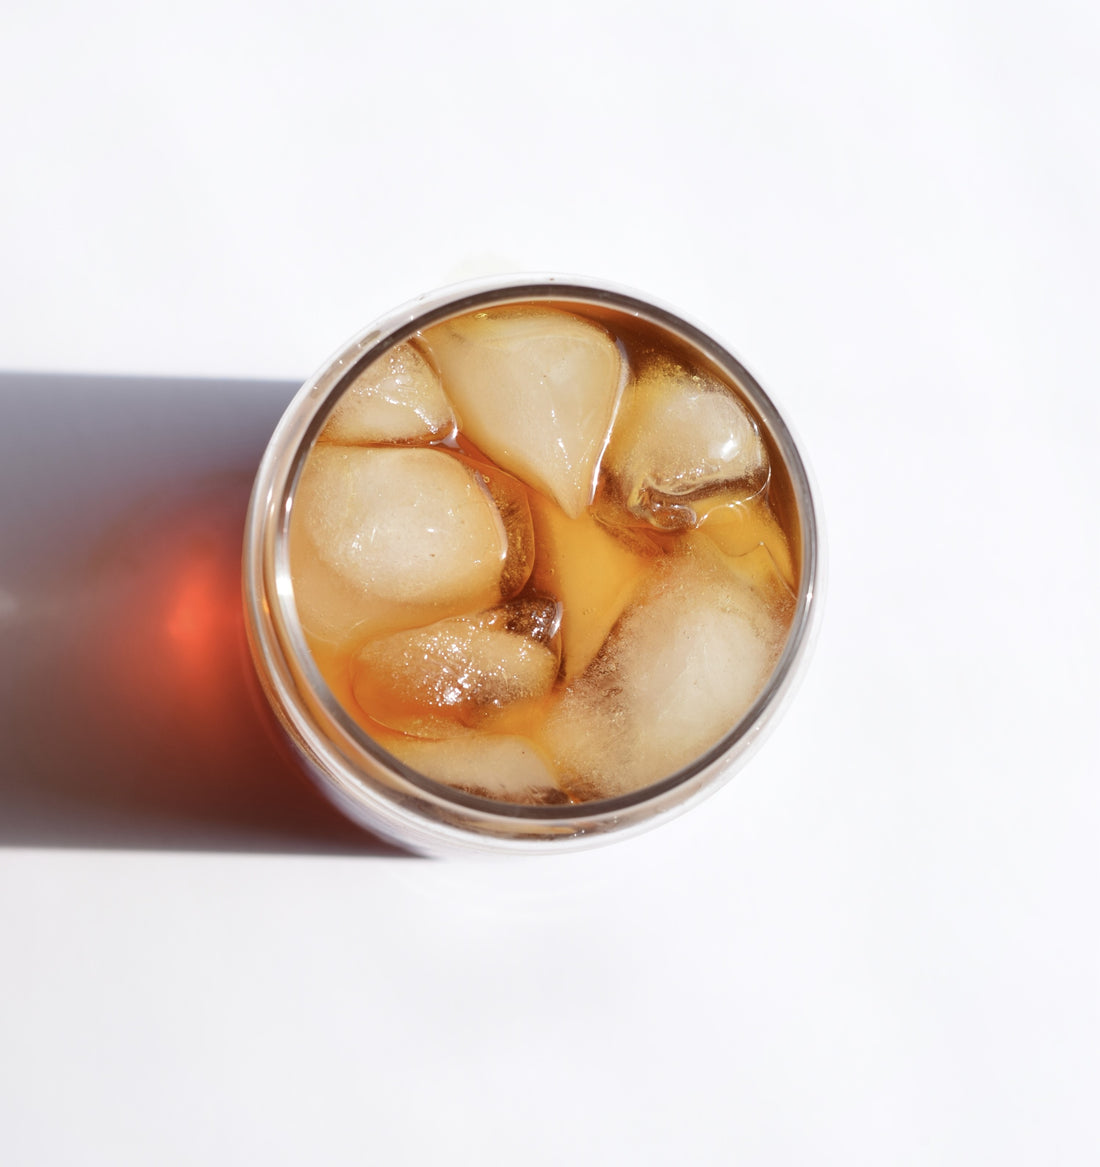 Chill out with Malu: How to make your new favorite iced coffee